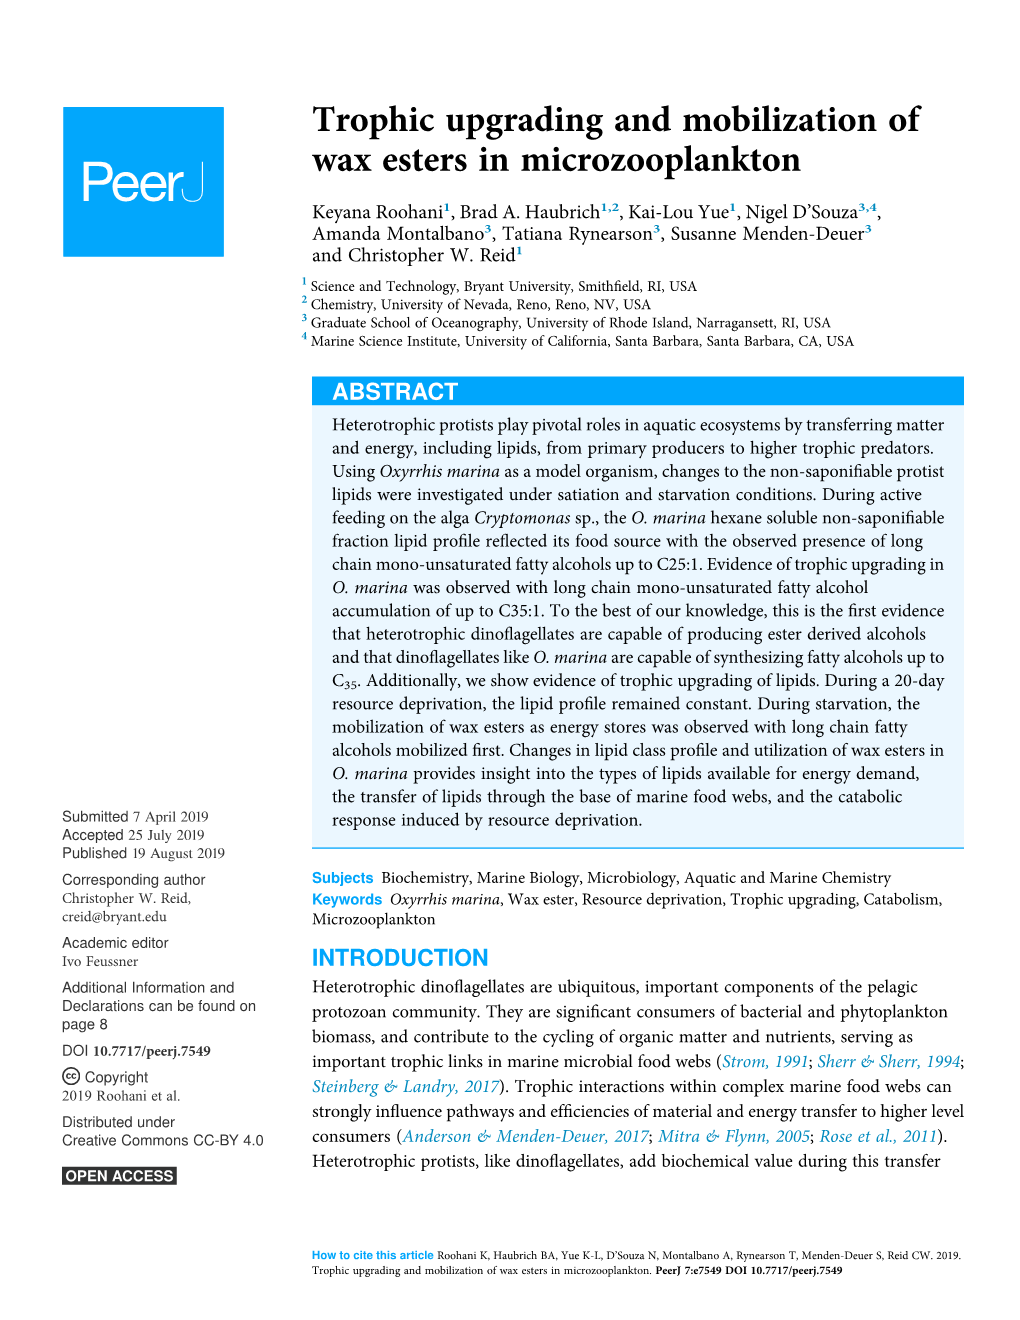 Trophic Upgrading and Mobilization of Wax Esters in Microzooplankton